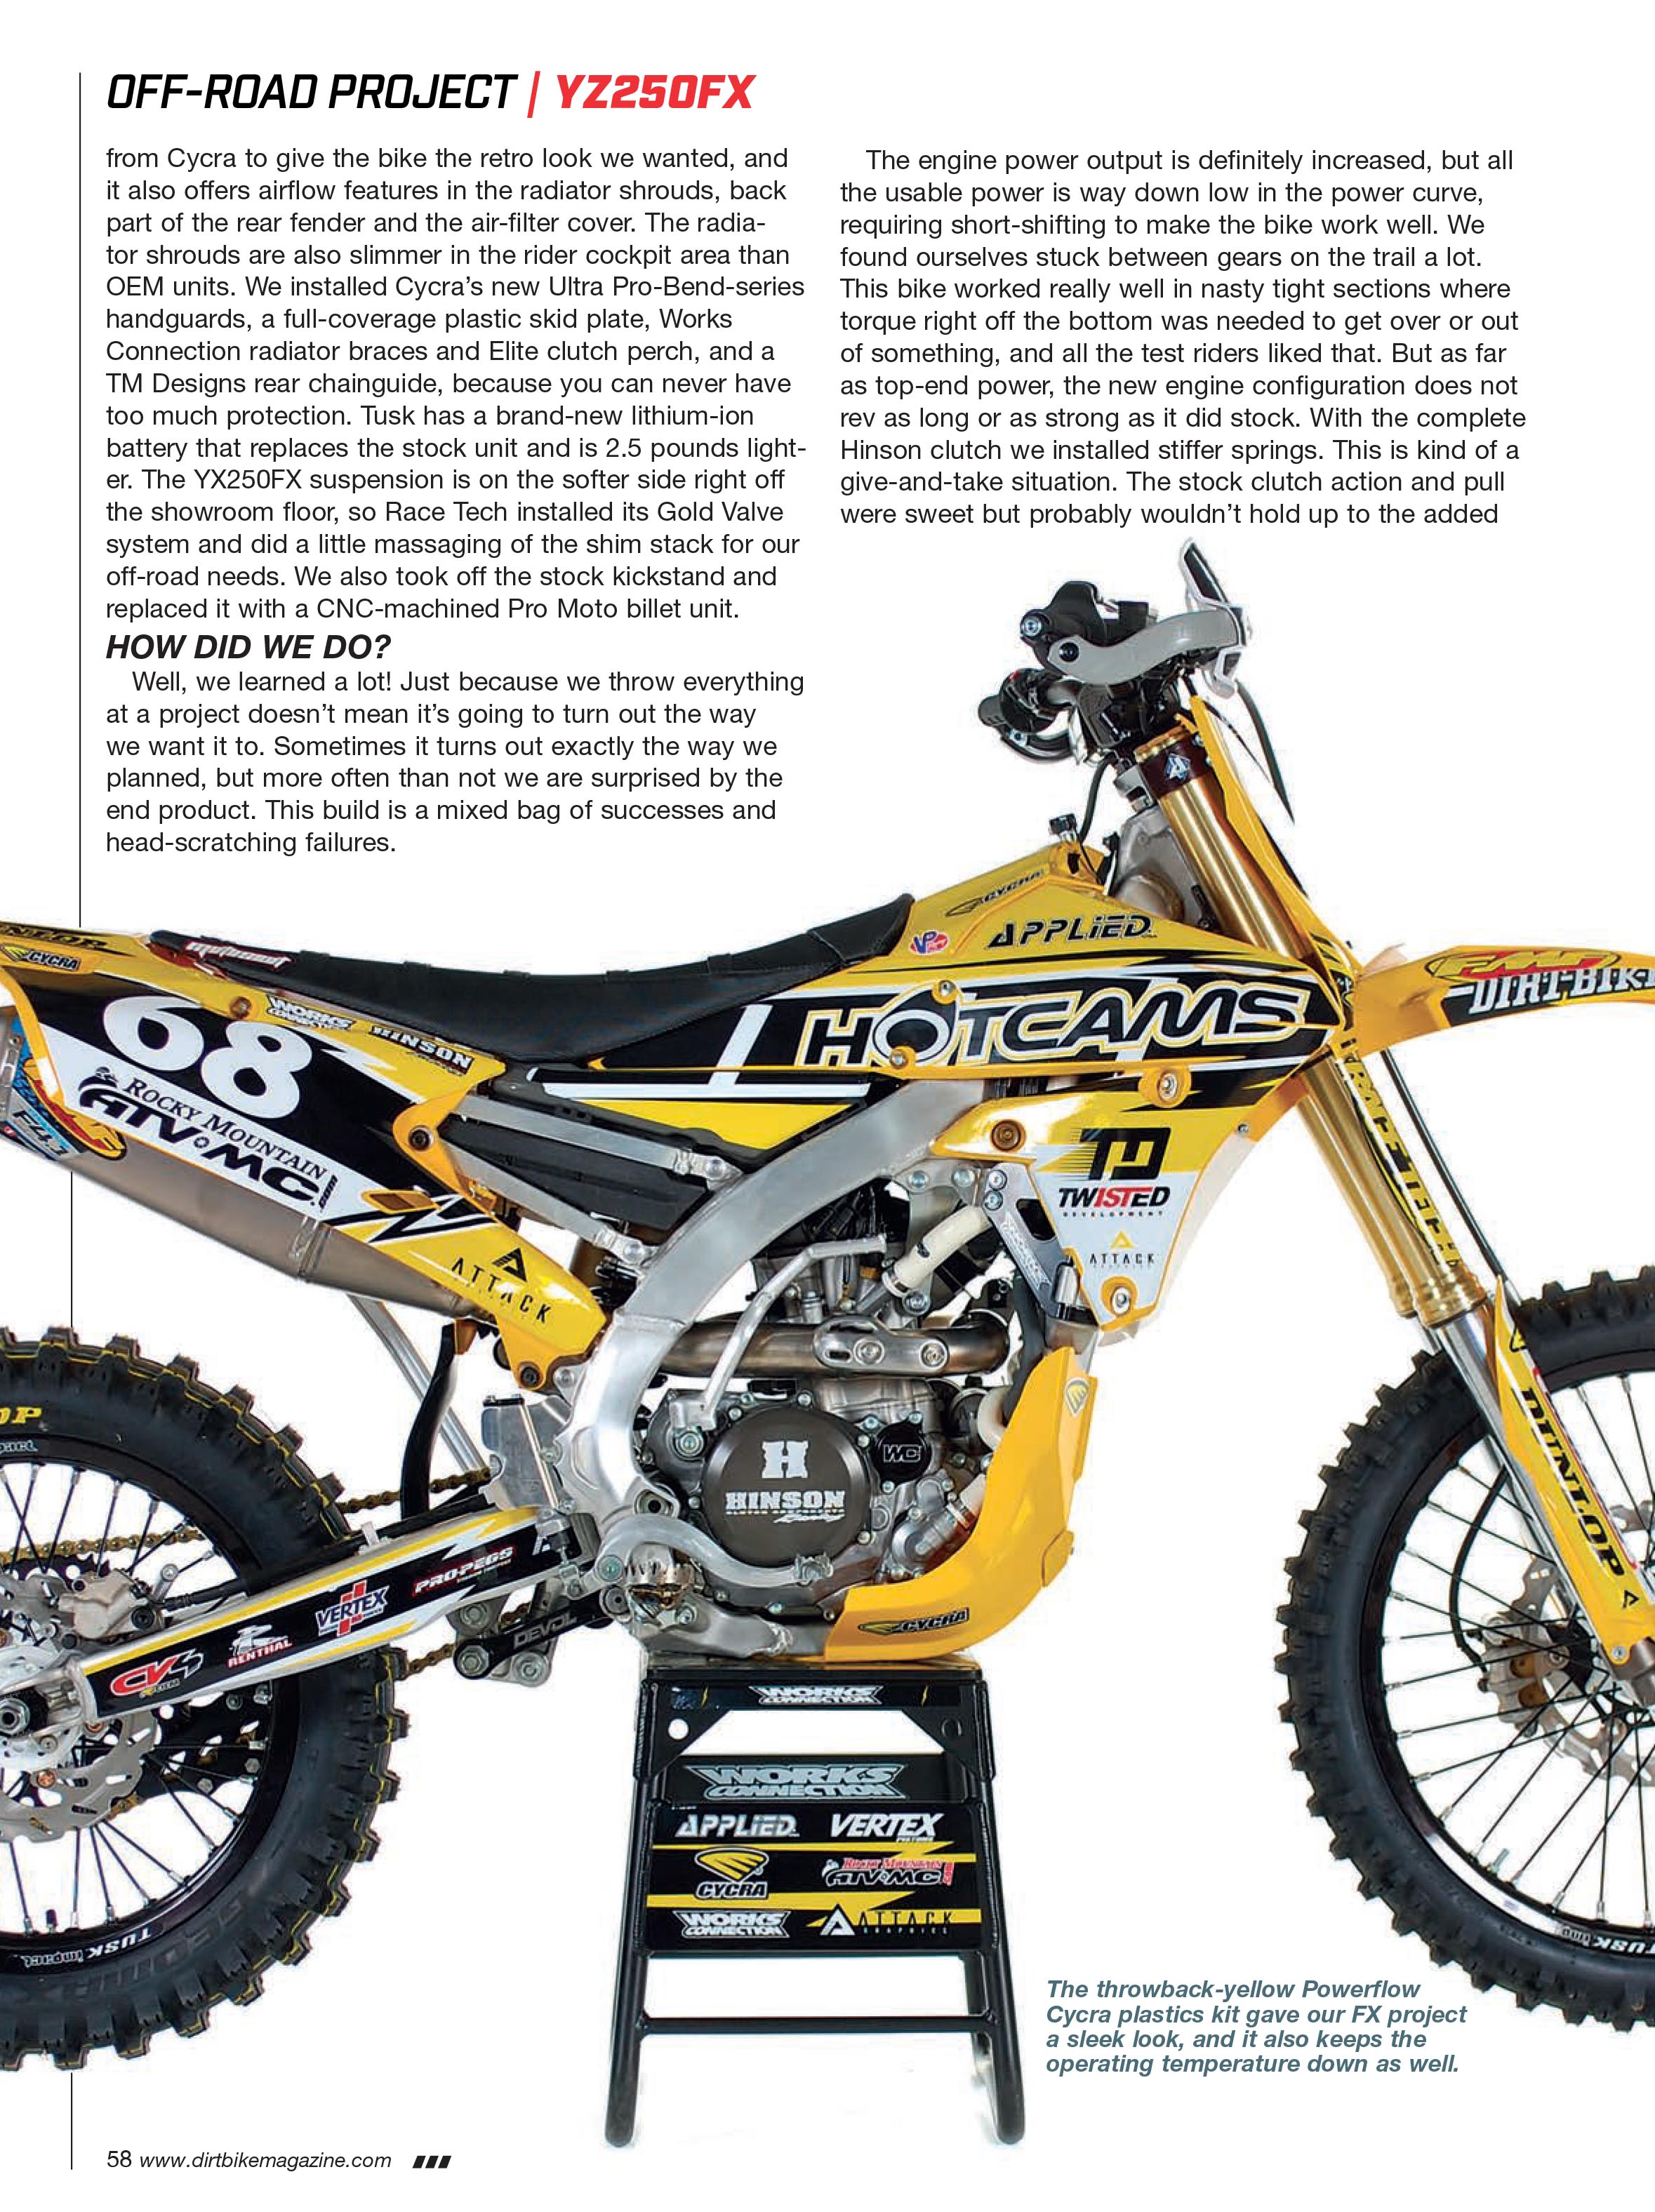 NEW-Hop-up-yz250 p54-60.indd